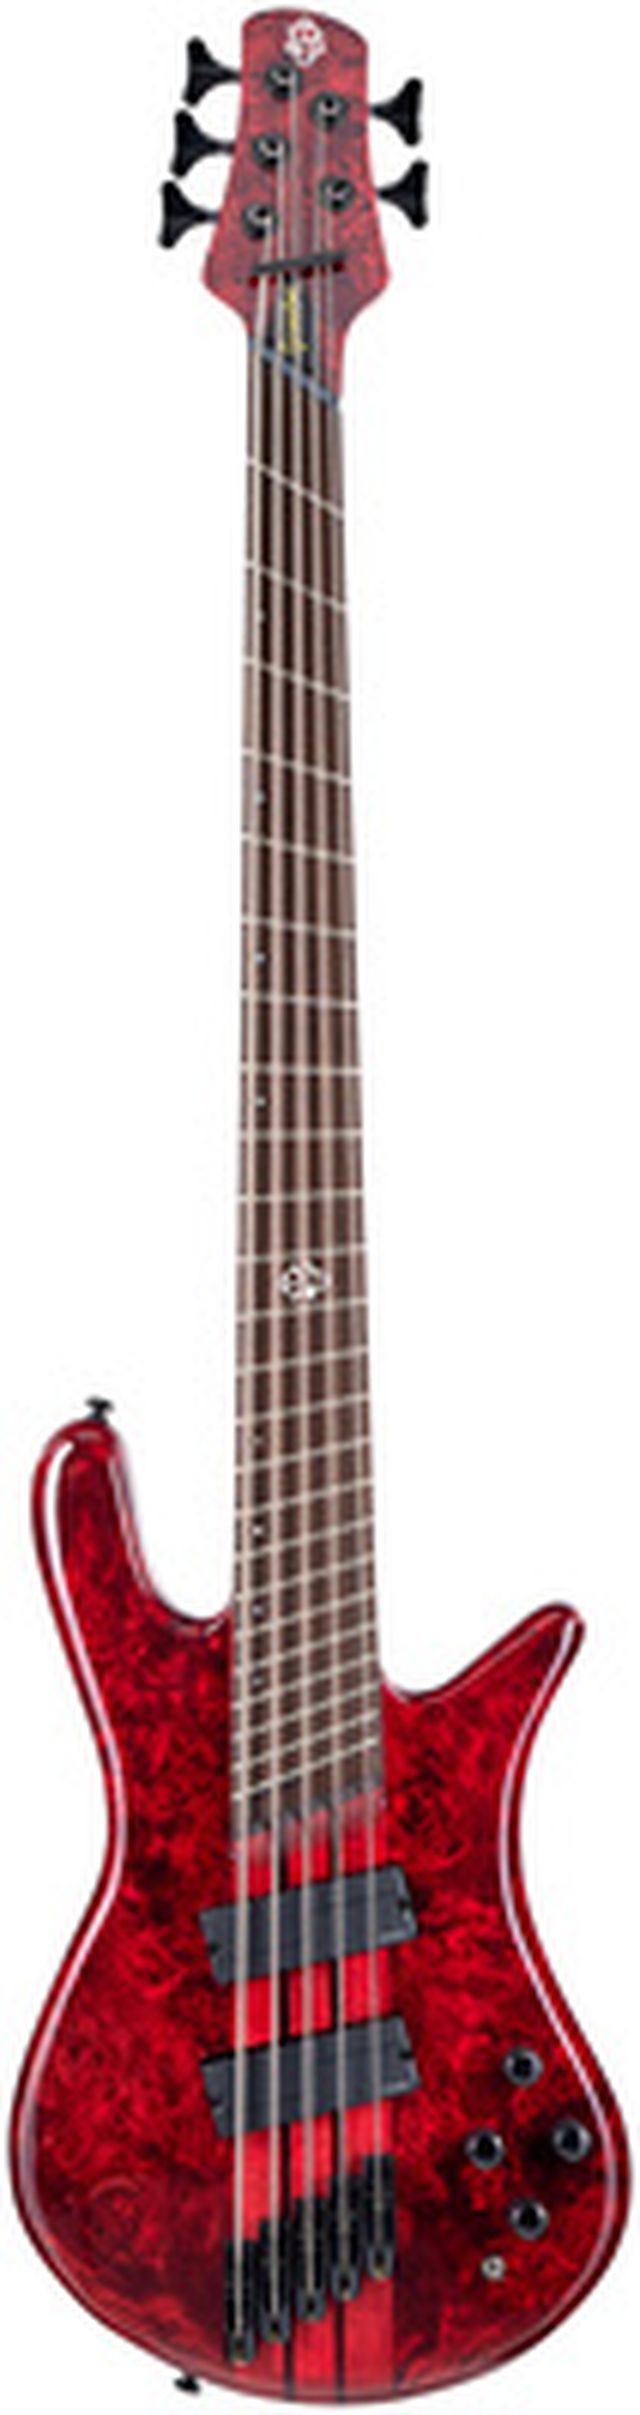 Spector NS Dimension MS 5 Inferno Red